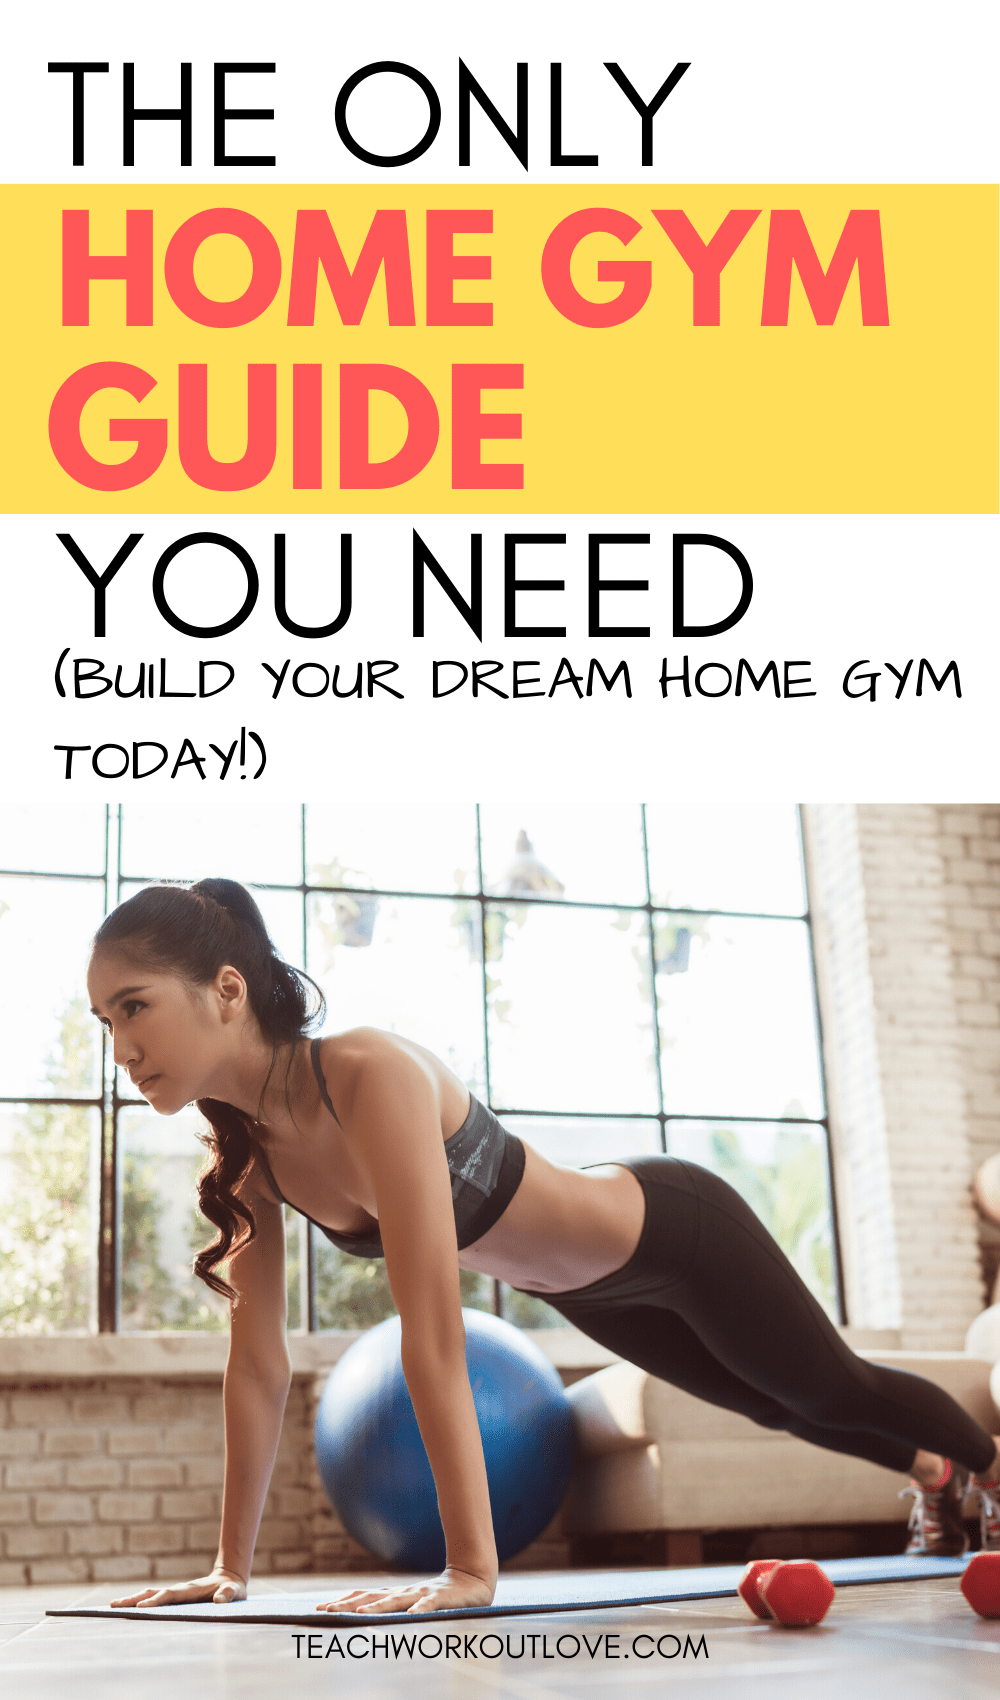 As our lifestyles are becoming more and more chaotic, it gets difficult to stay in shape. Time to get started on creating the perfect home gym. Here's how.